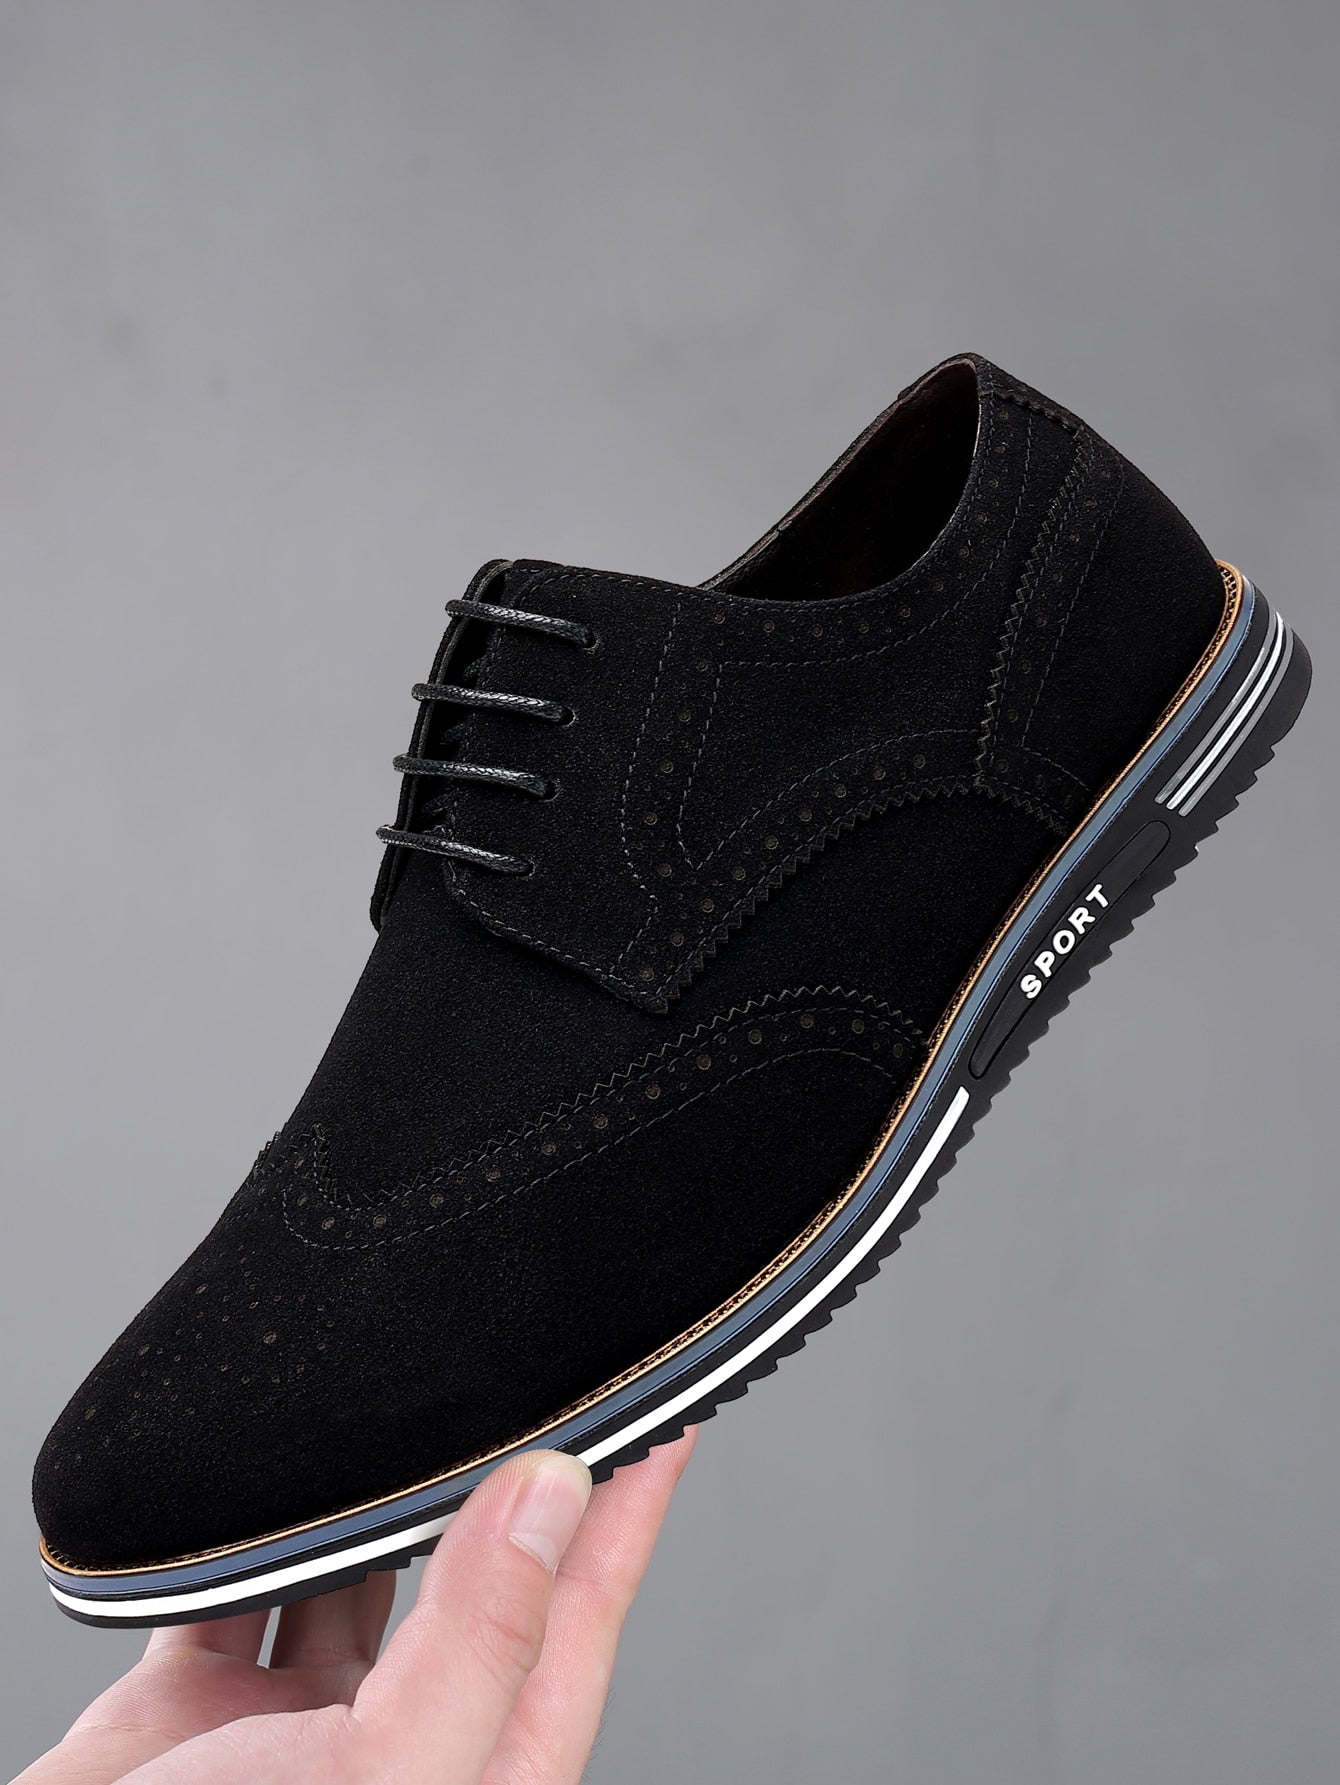 Men Black Lace-up Front Casual shoes, Letter Striped Round Toe Dress Shoes For Daily